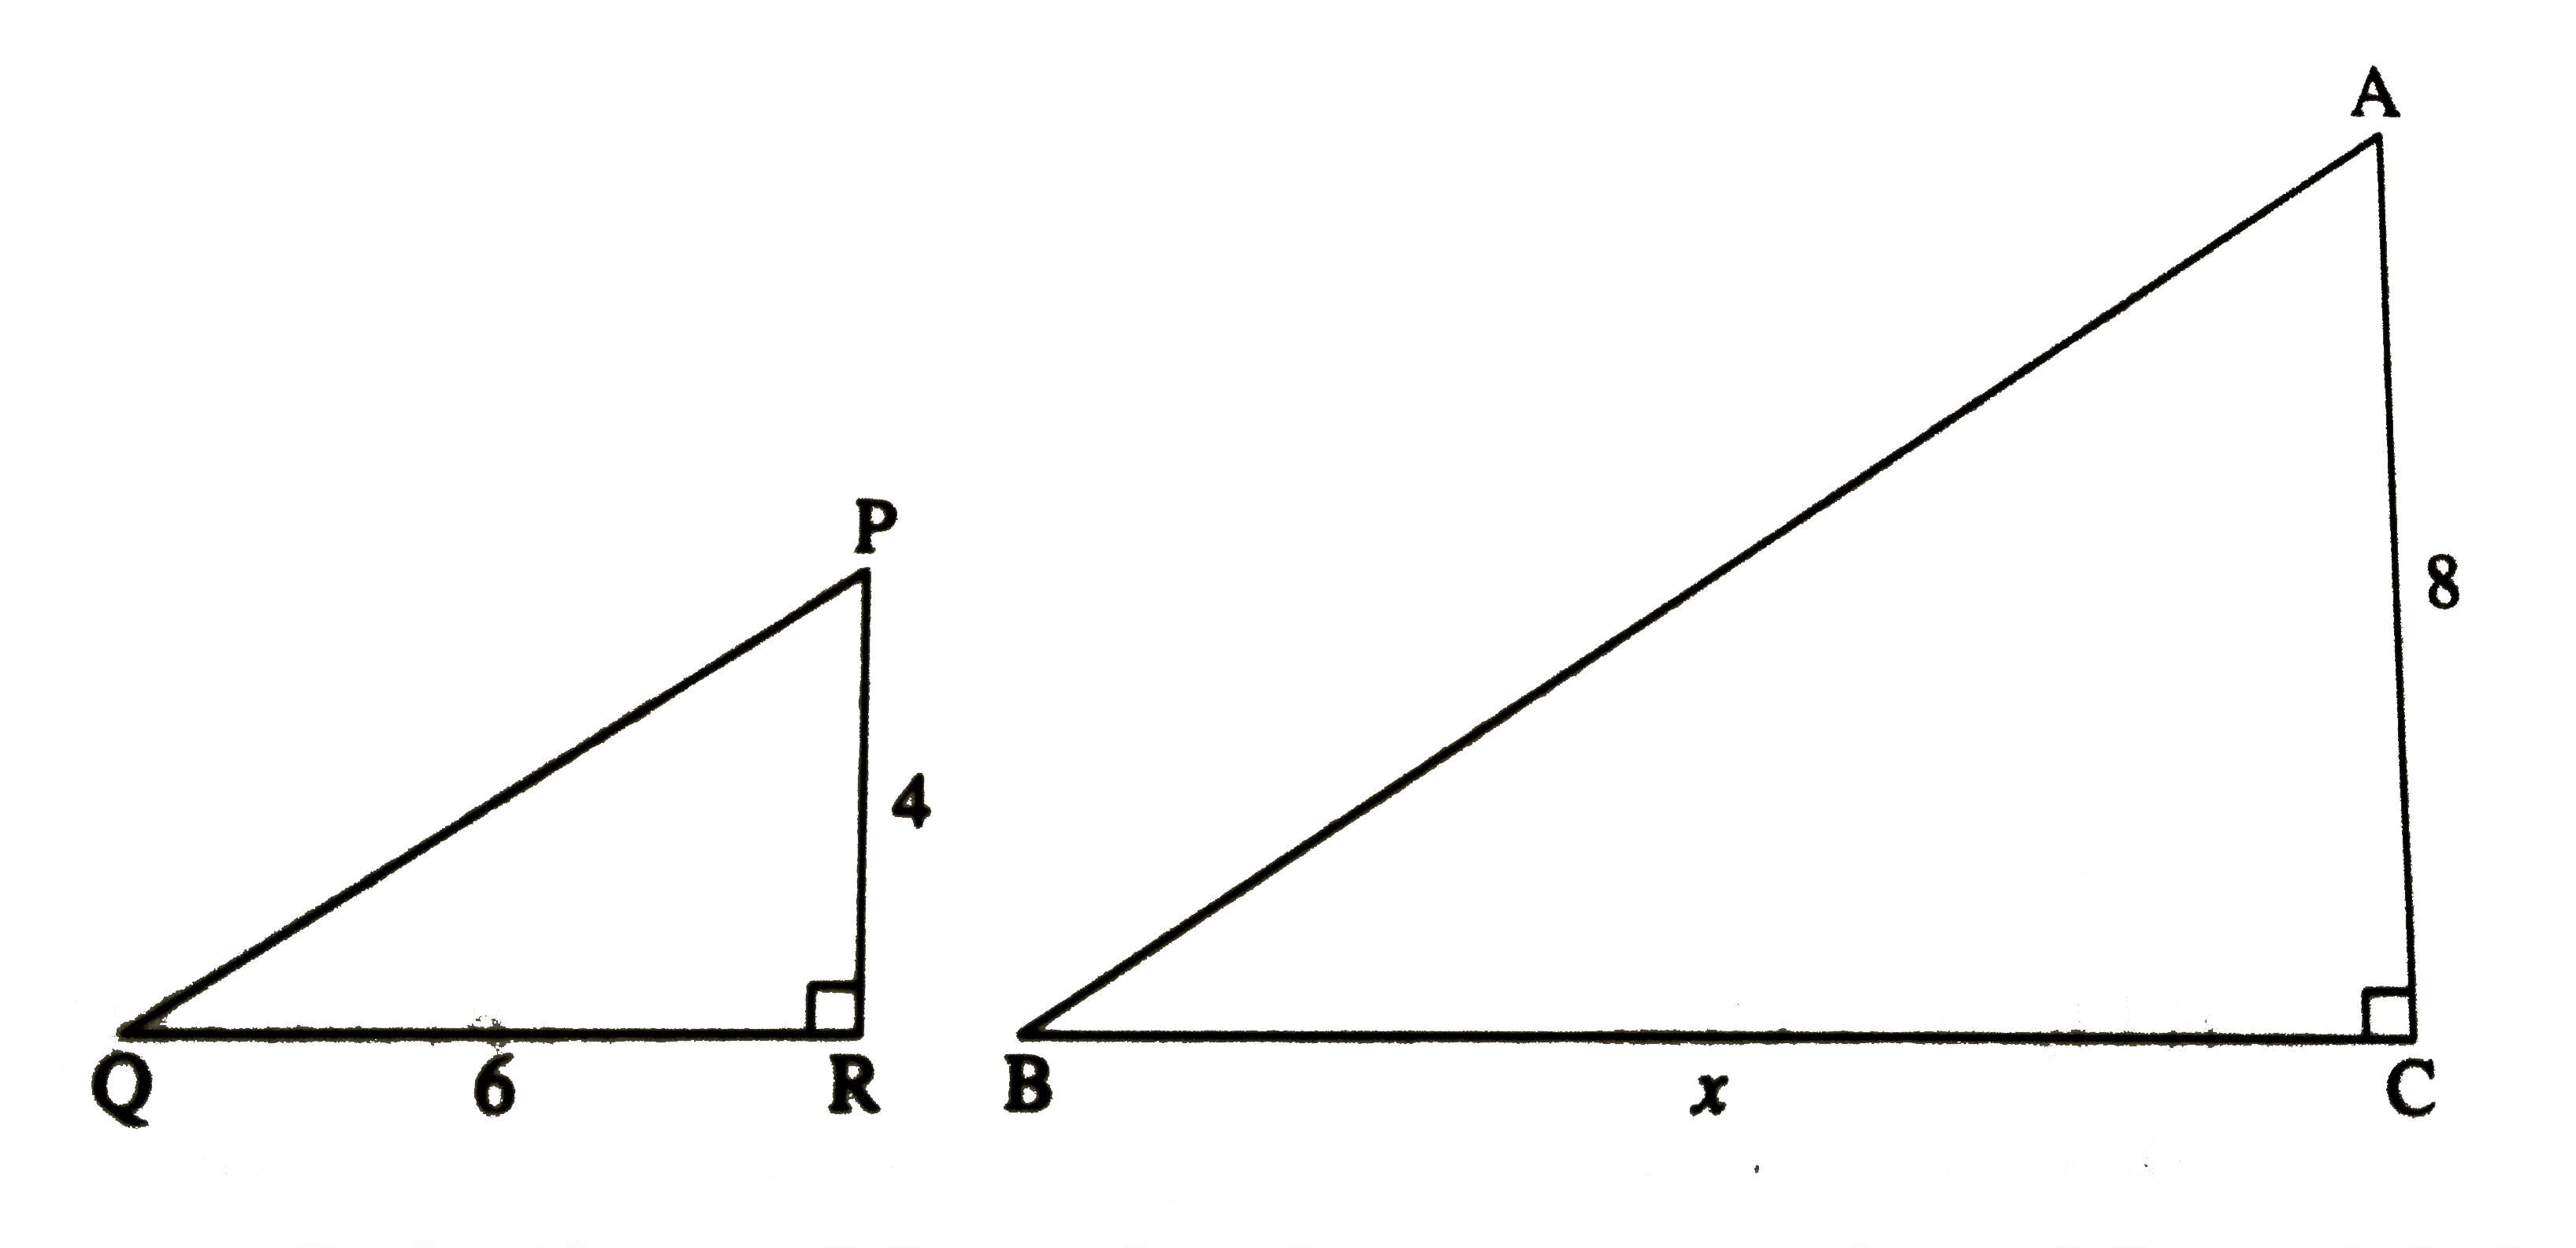 As shown in the figures, two poles of height 8m and 4m are perpendicul